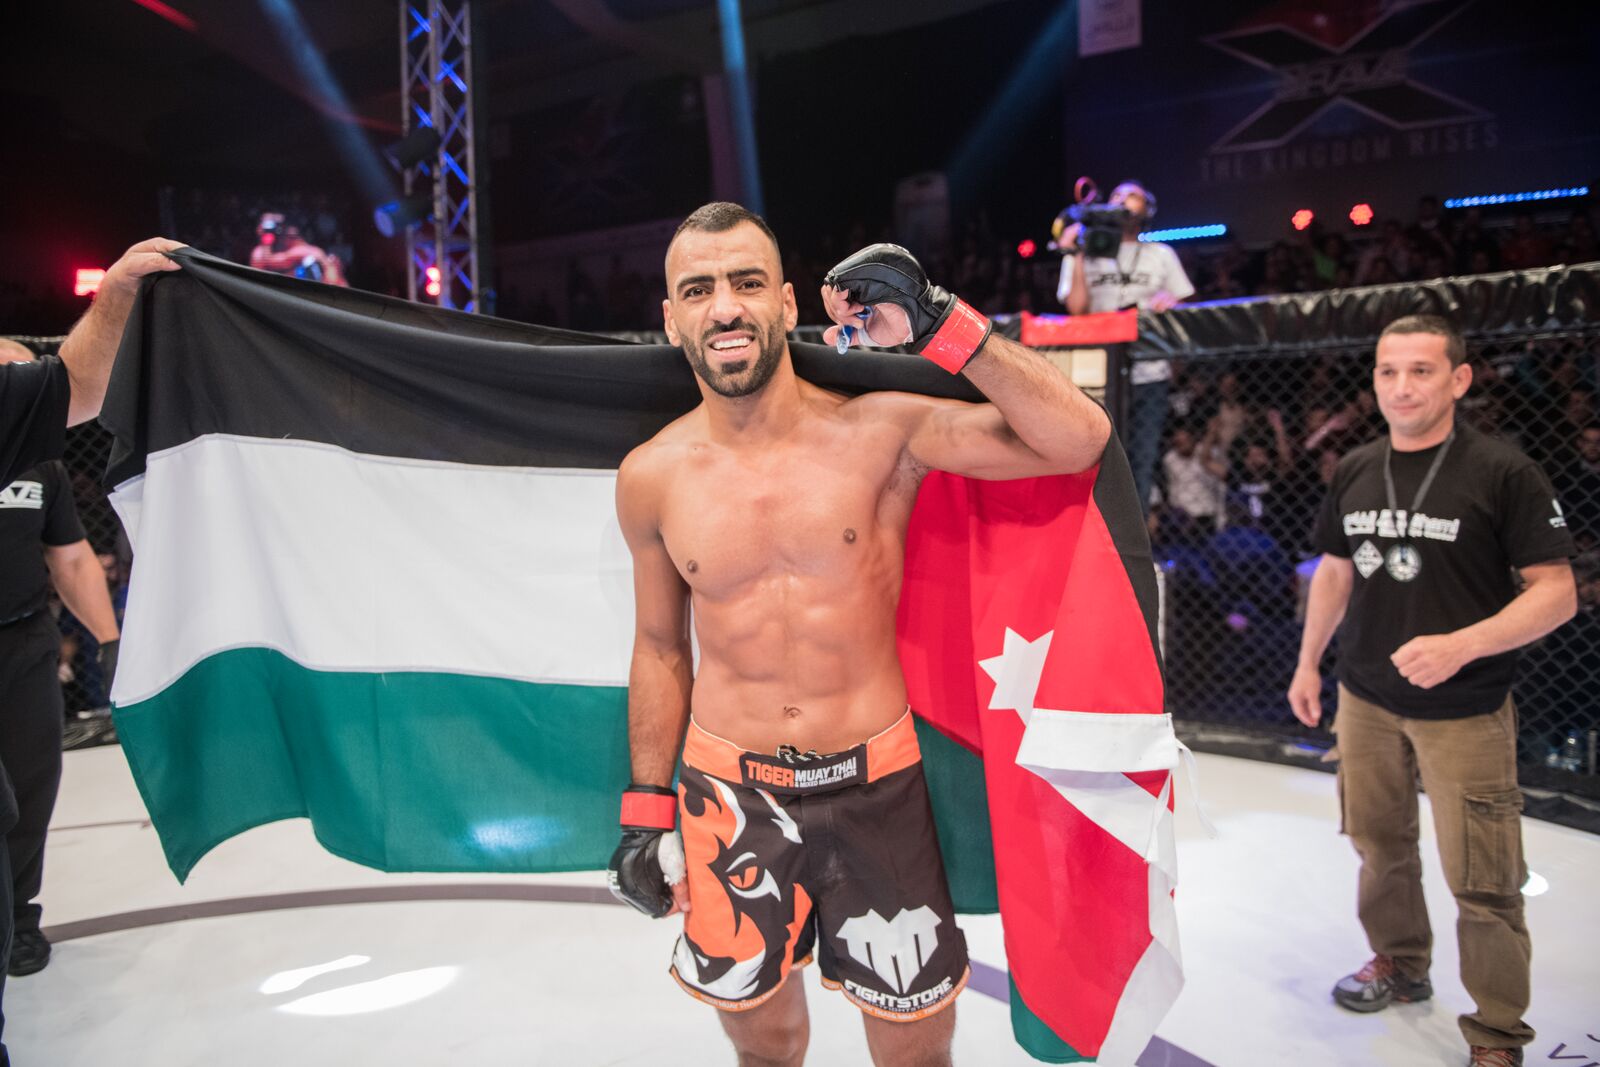 Al-Daaja looks to inspire as he eyes title shot after Brave 23 -